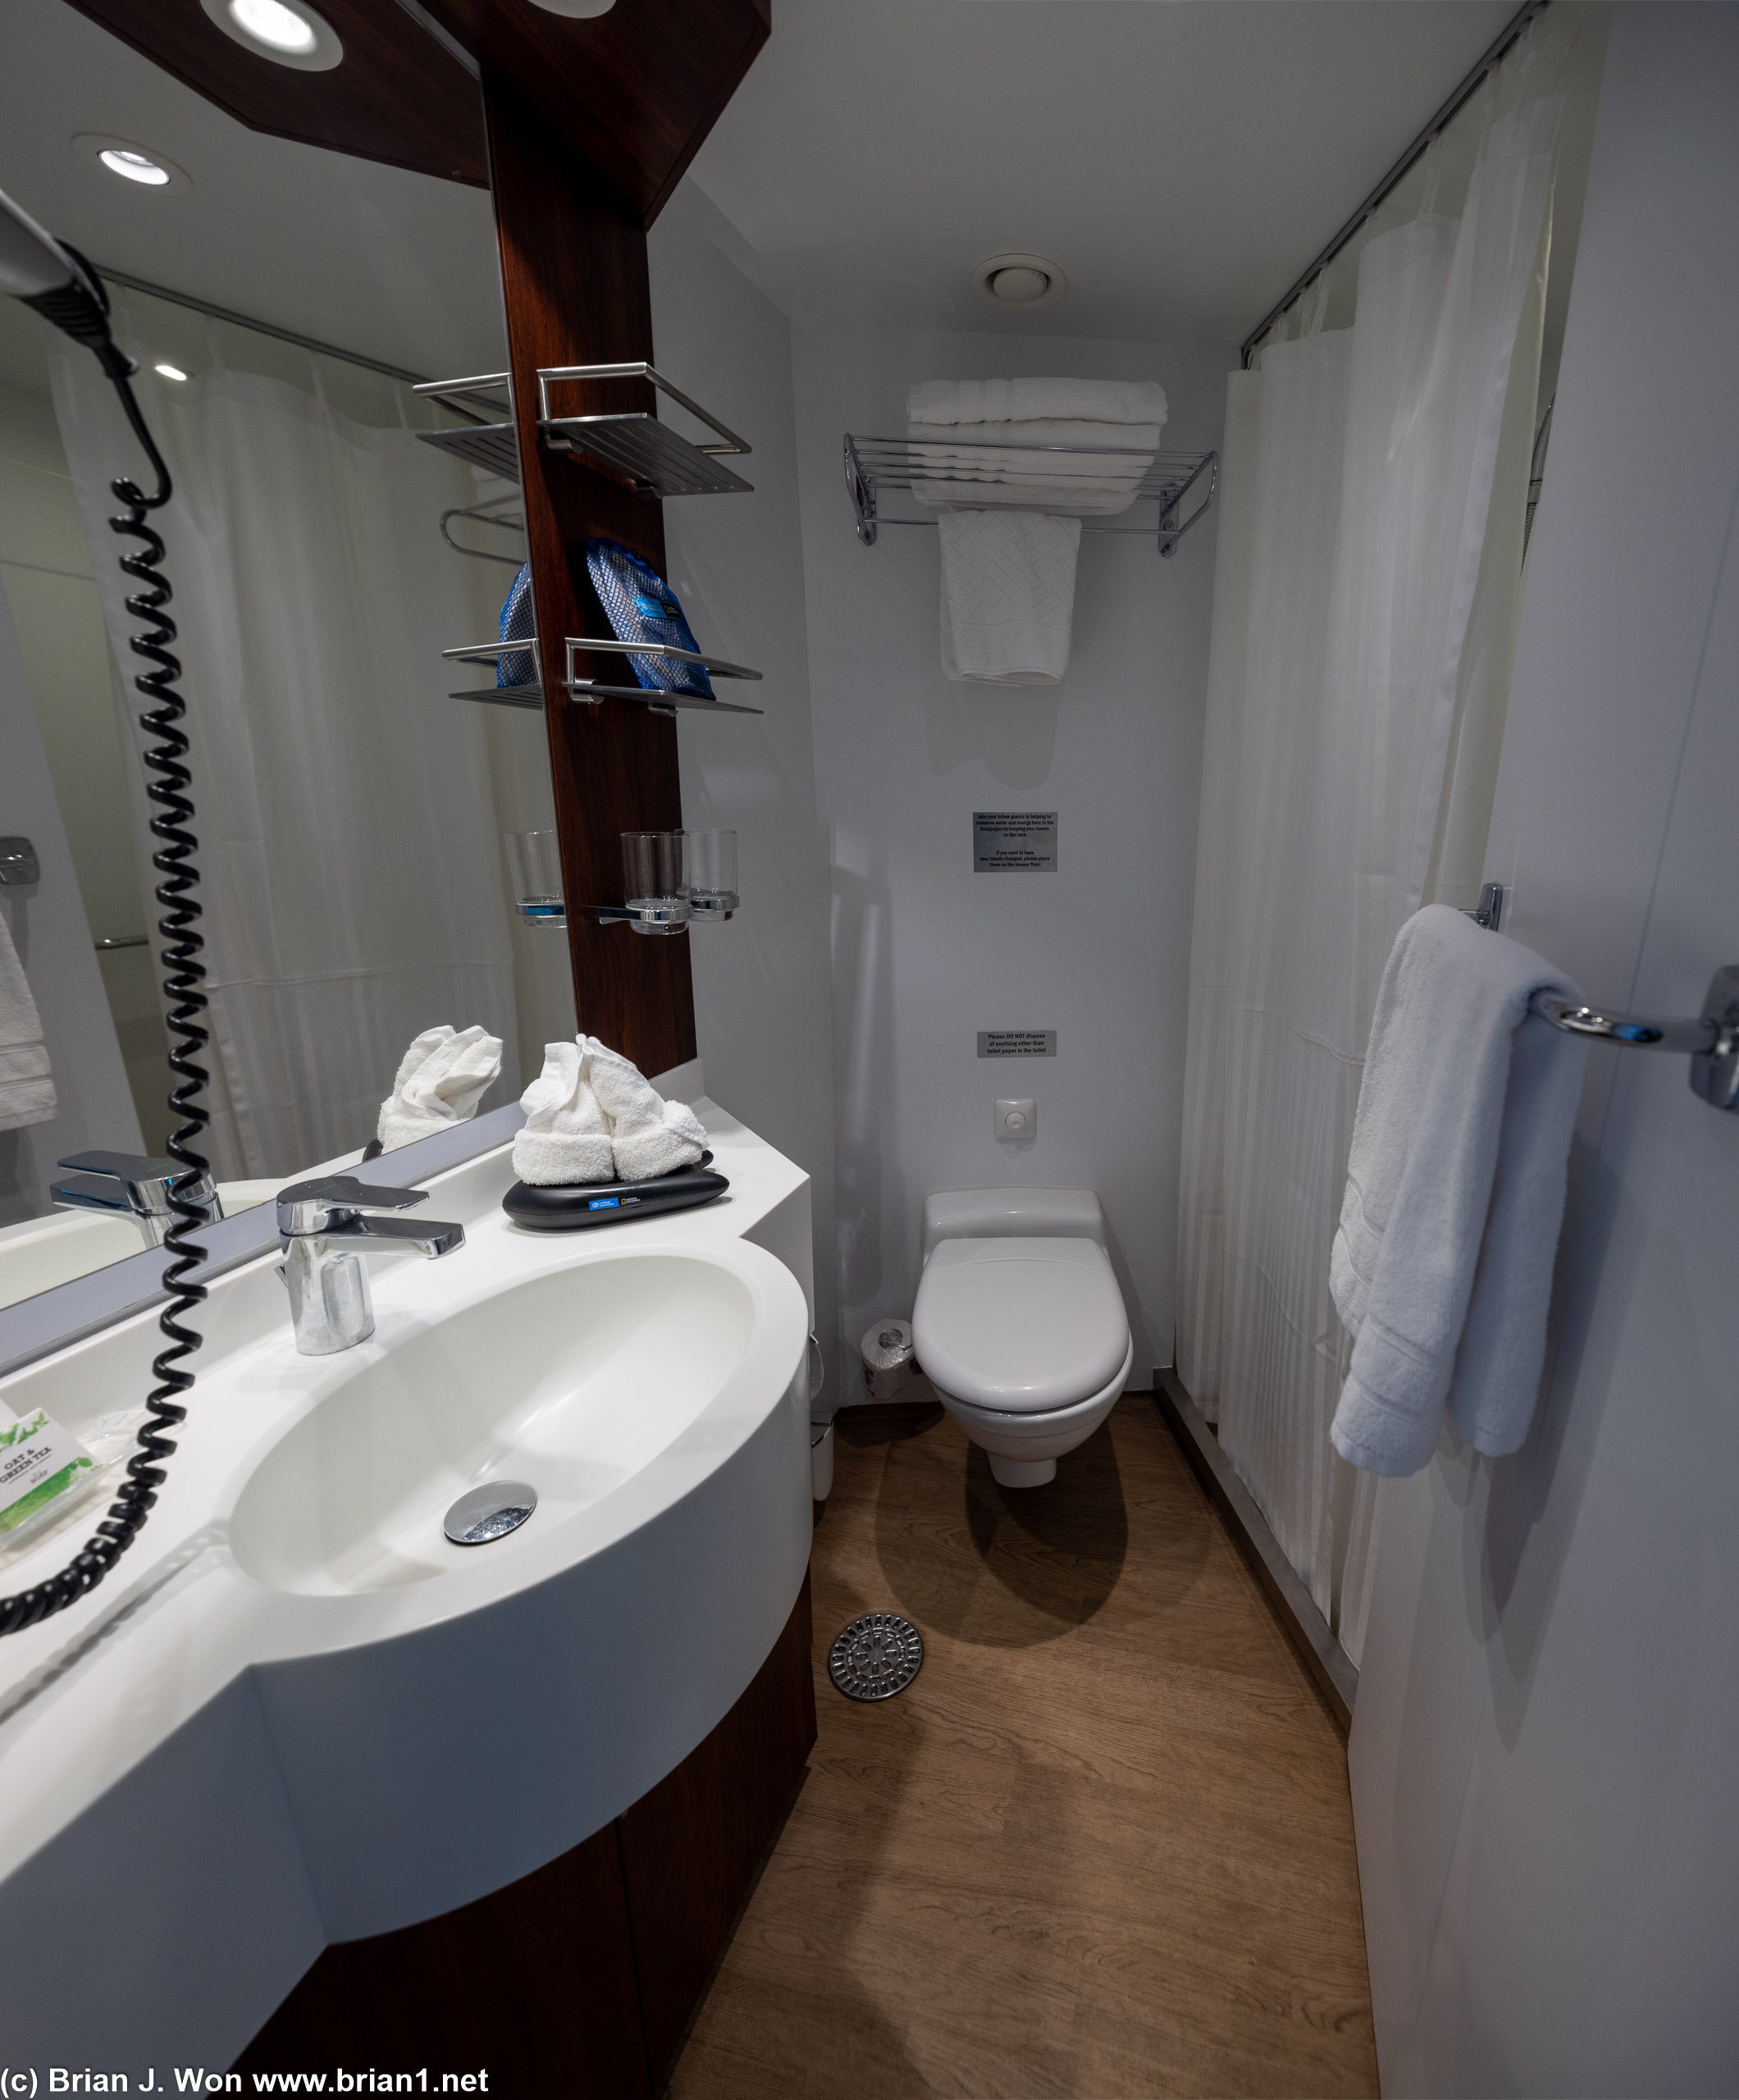 Bathroom is reasonably spacious for a little expedition cruise ship.